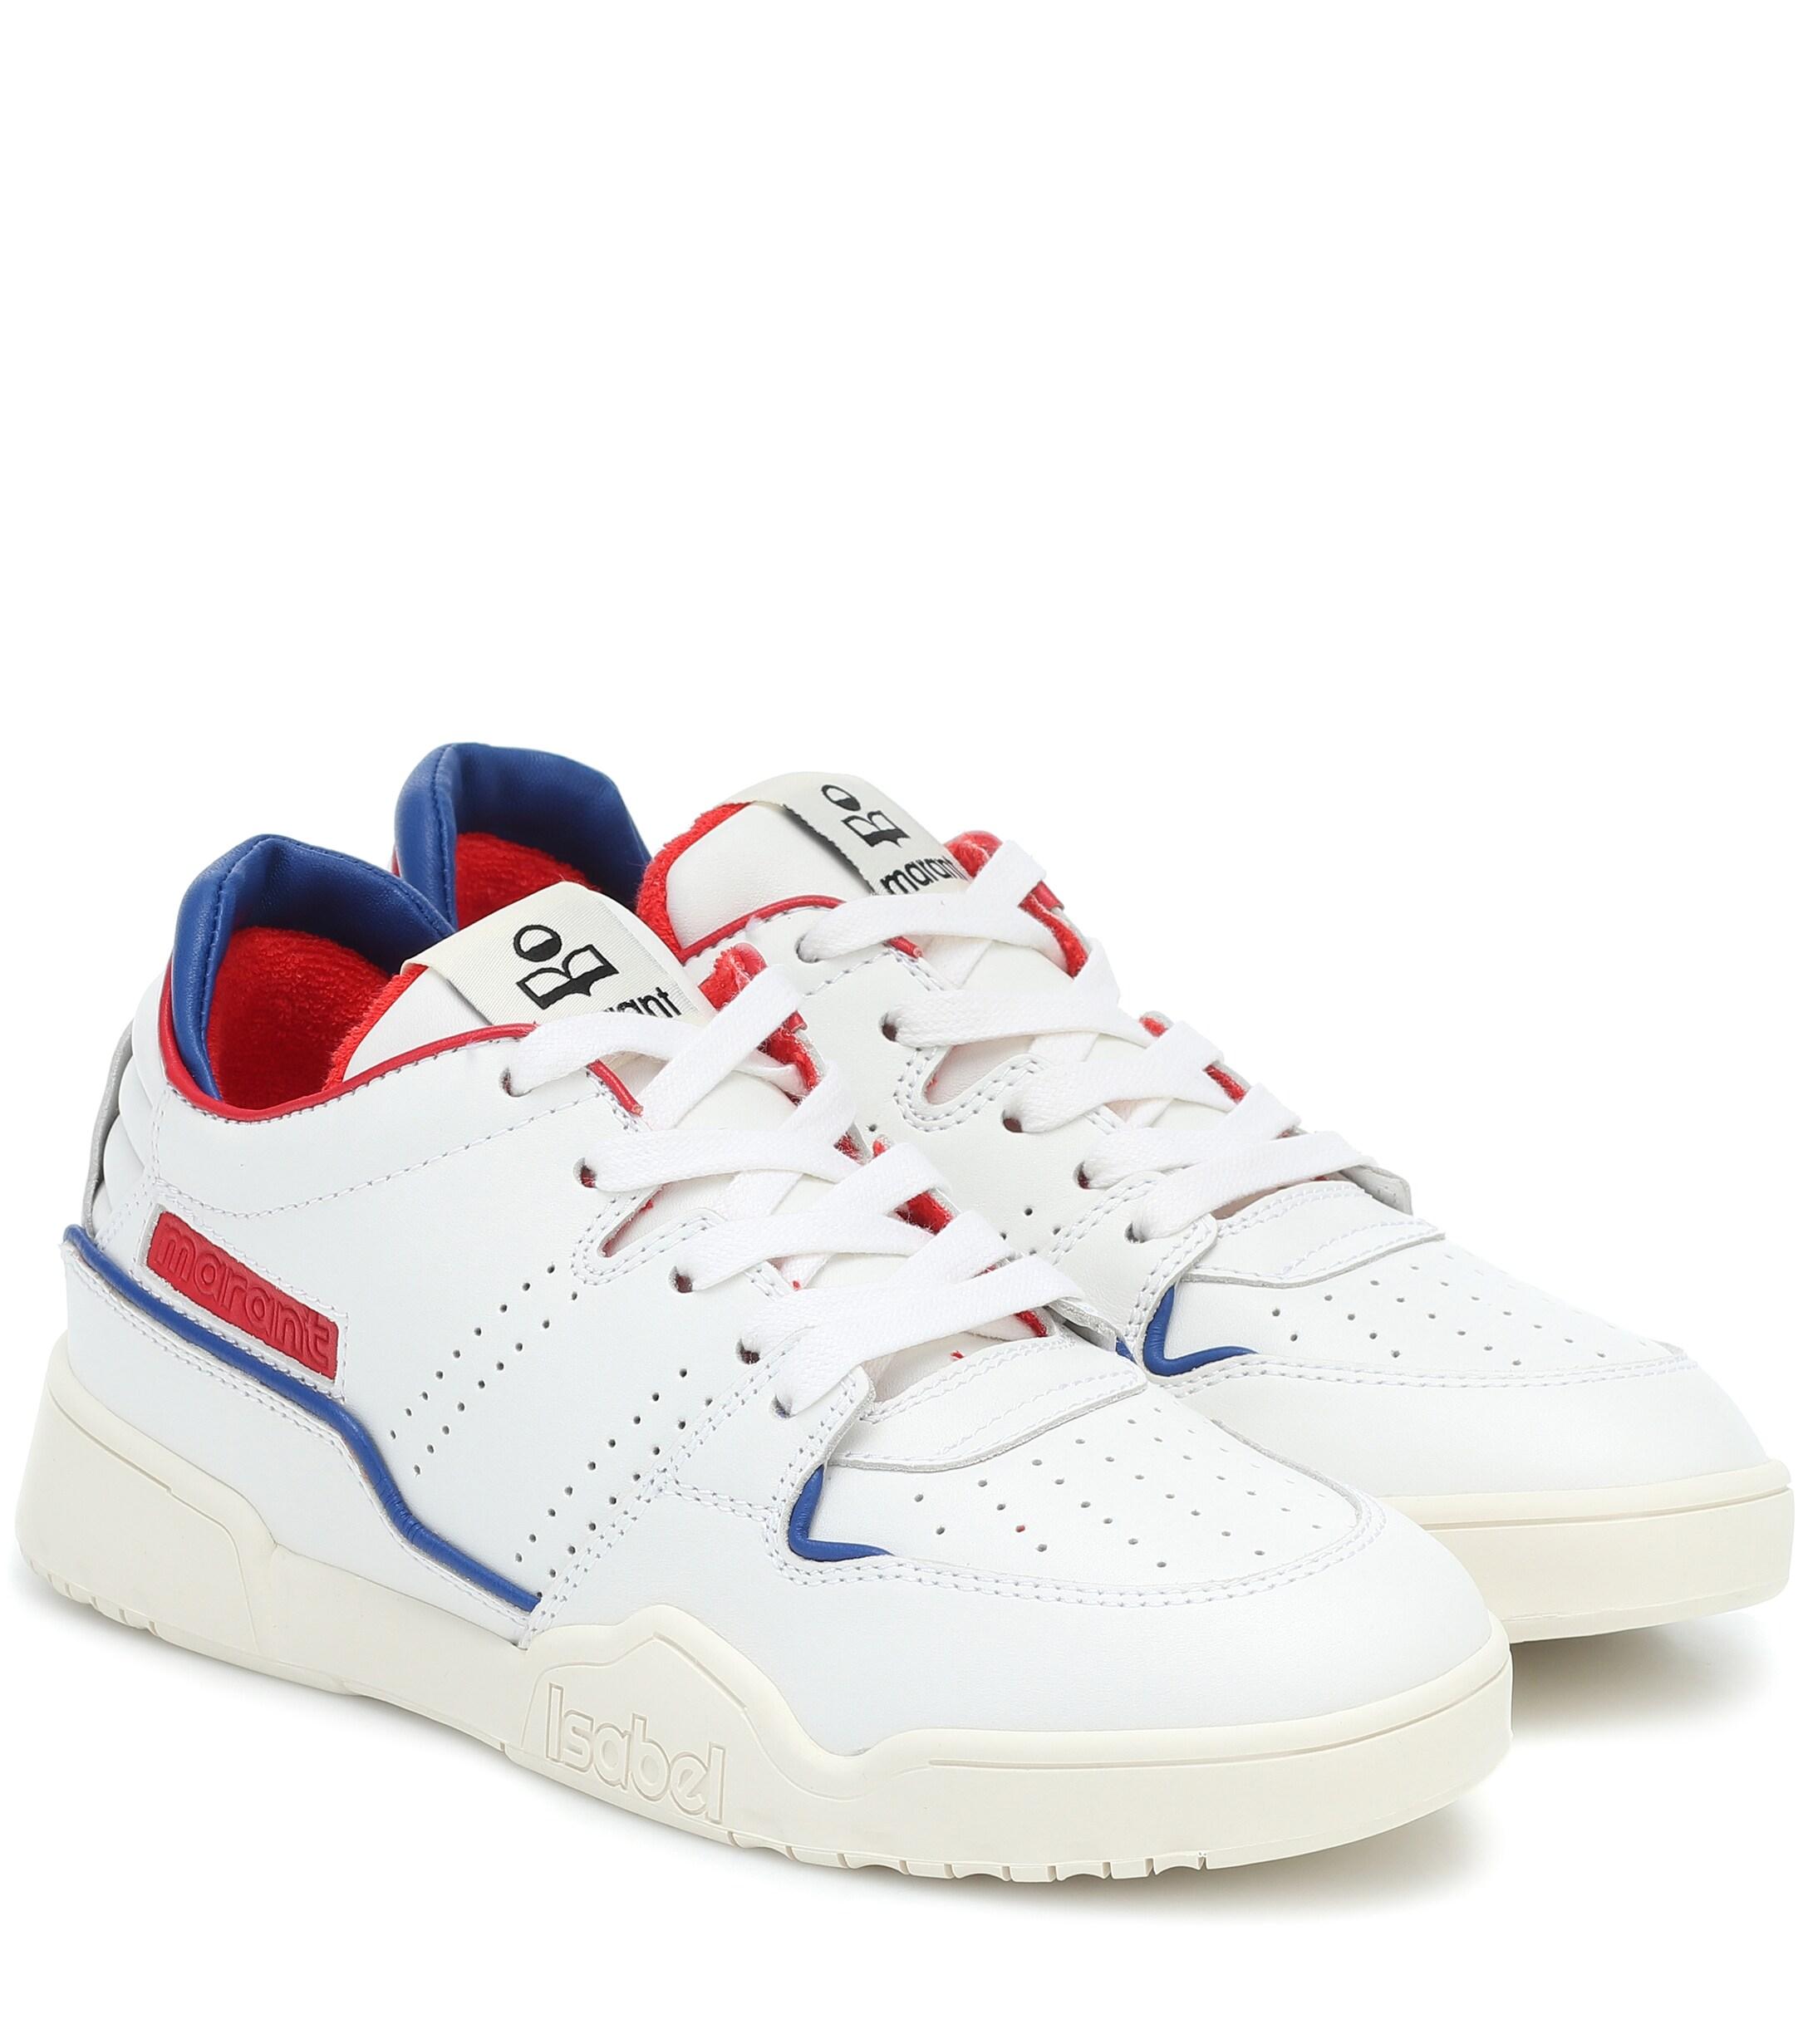 Isabel Marant Emree Low-top Leather Sneakers in White - Lyst